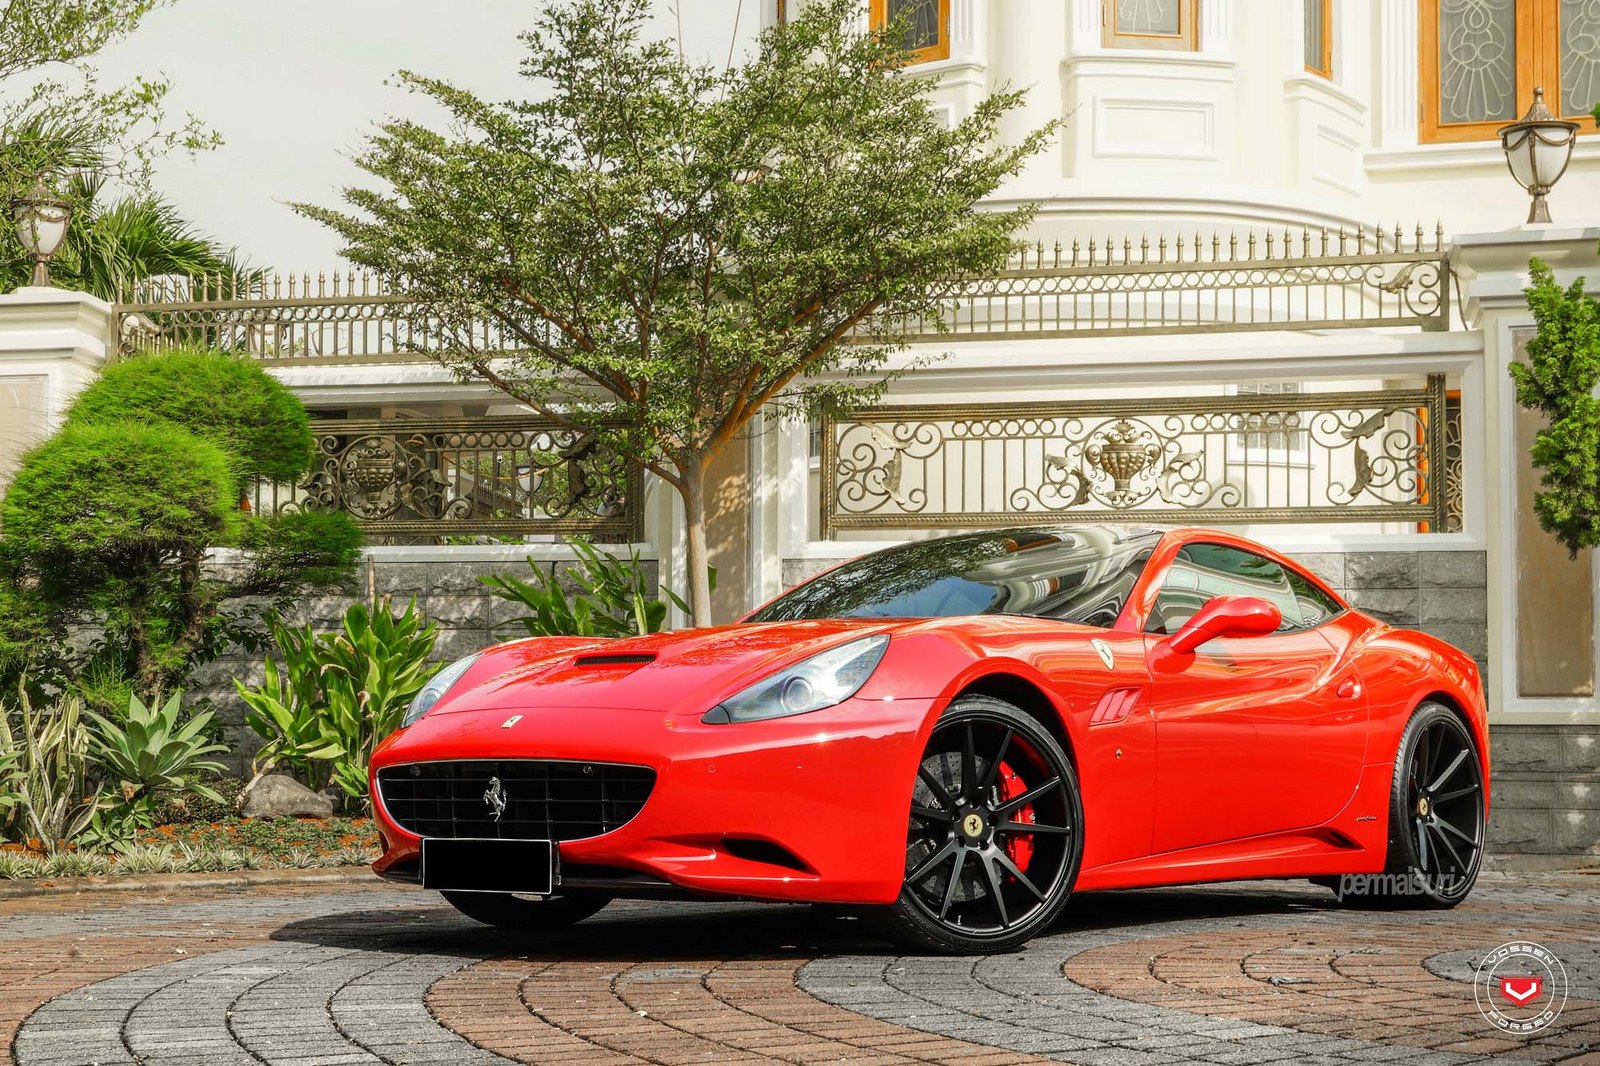 Aftermarket Vented Hood on Red Ferrari California - Photo by Vossen